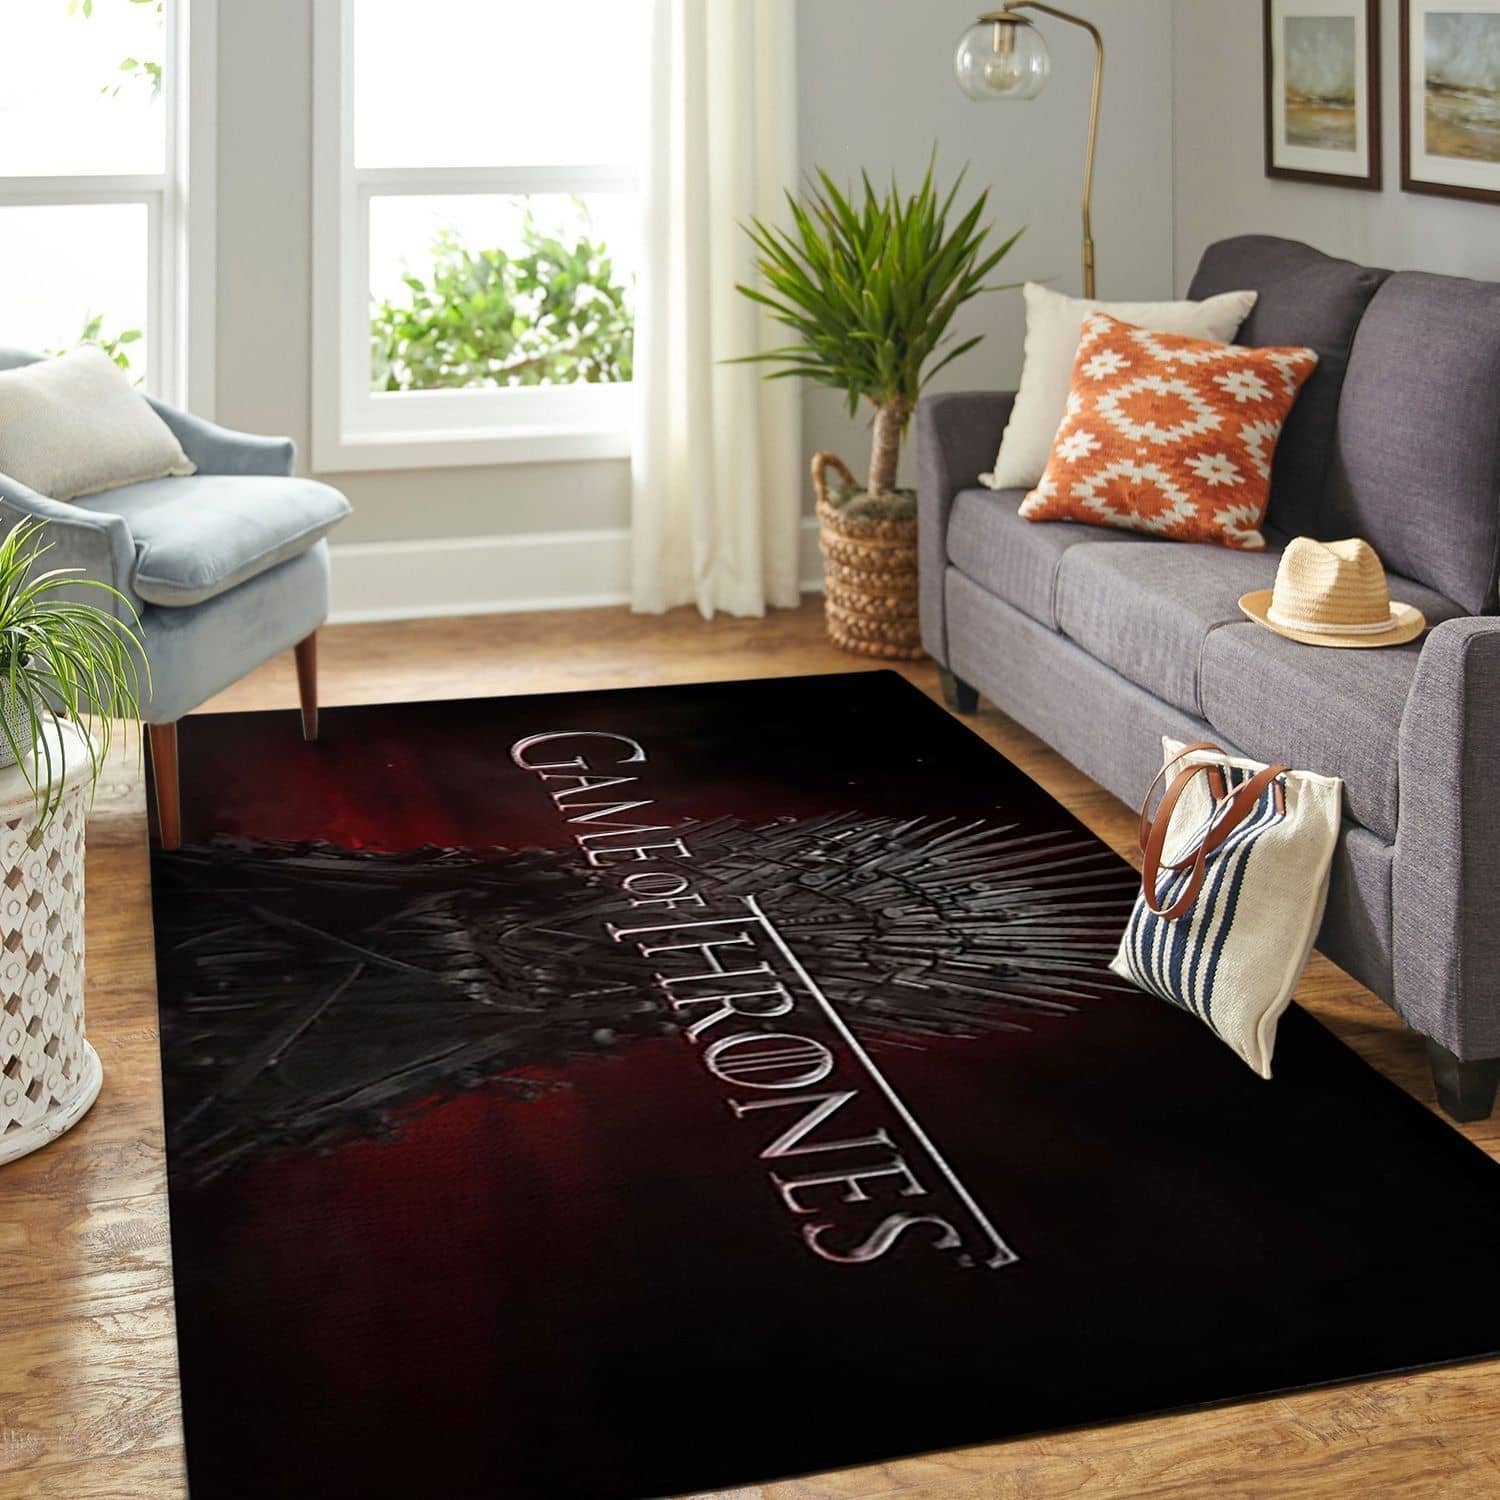 Amazon Game Of Thrones Living Room Area No6104 Rug